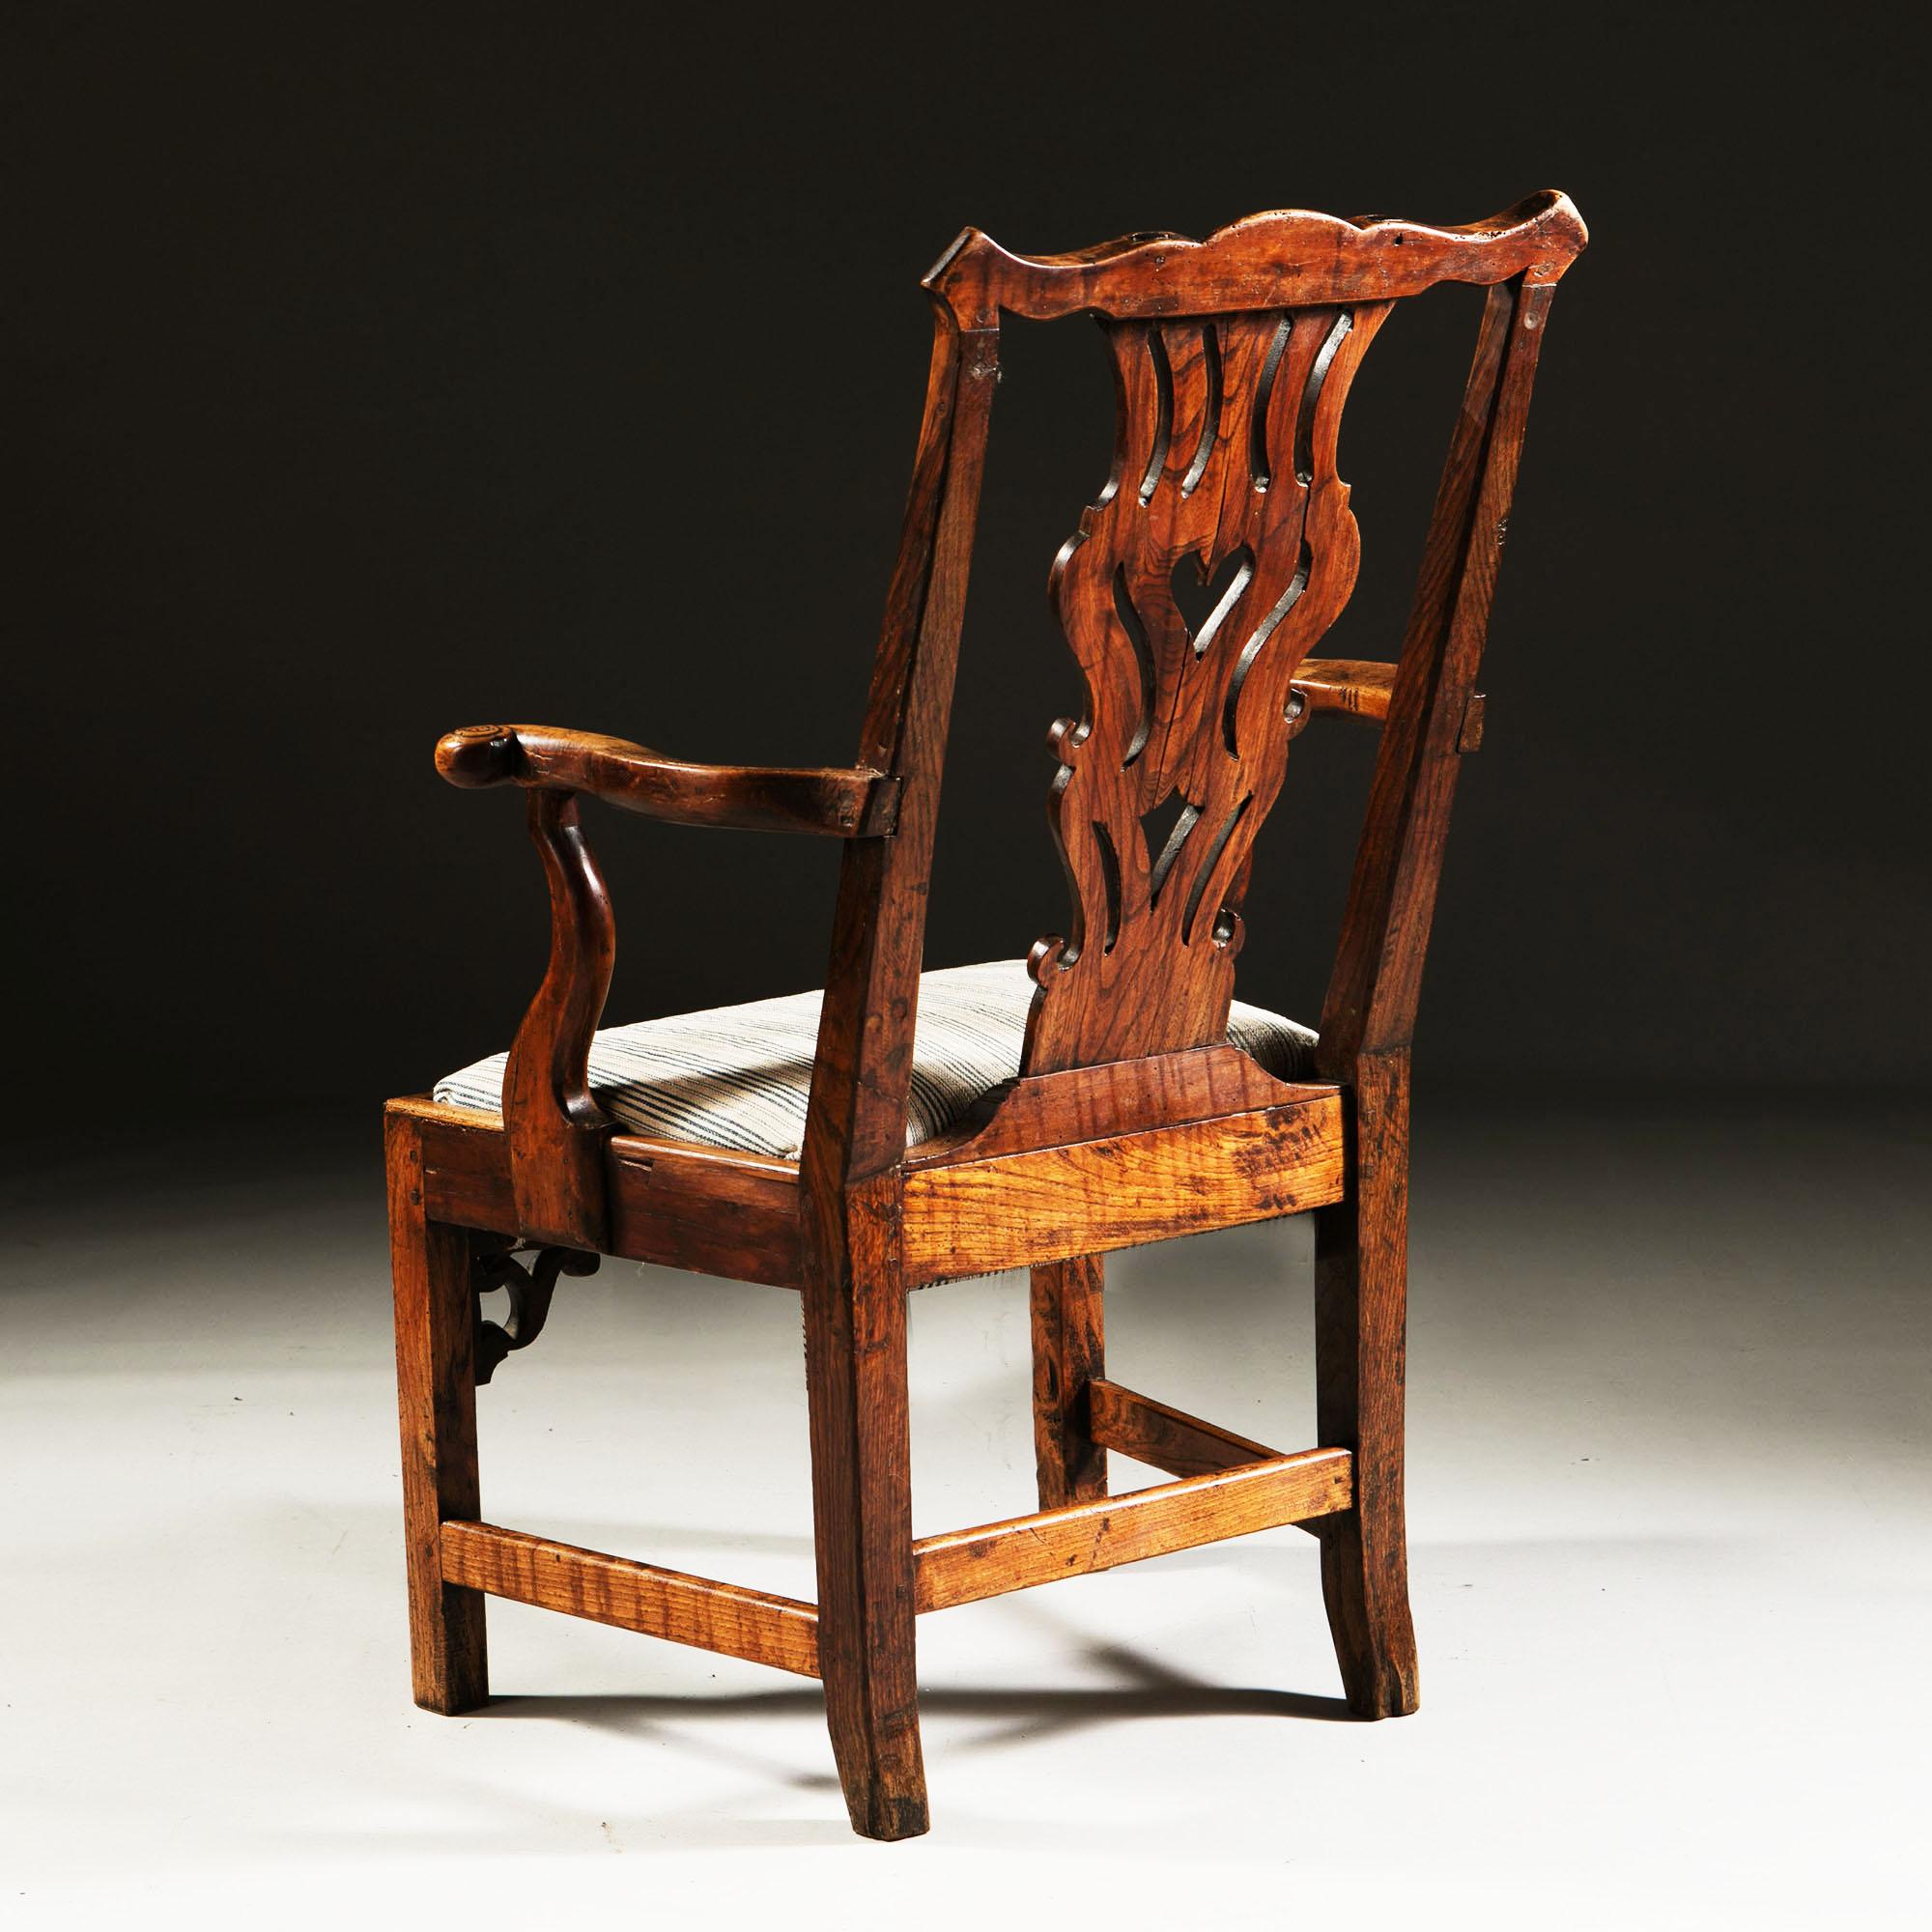 A fine early 18th century English yew wood Windsor chair with outswept arms, Chippendale back splat and a carved and shaped apron, with finely figured wood throughout, the drop in seat upholstered in a antique linen stripe.

Height               